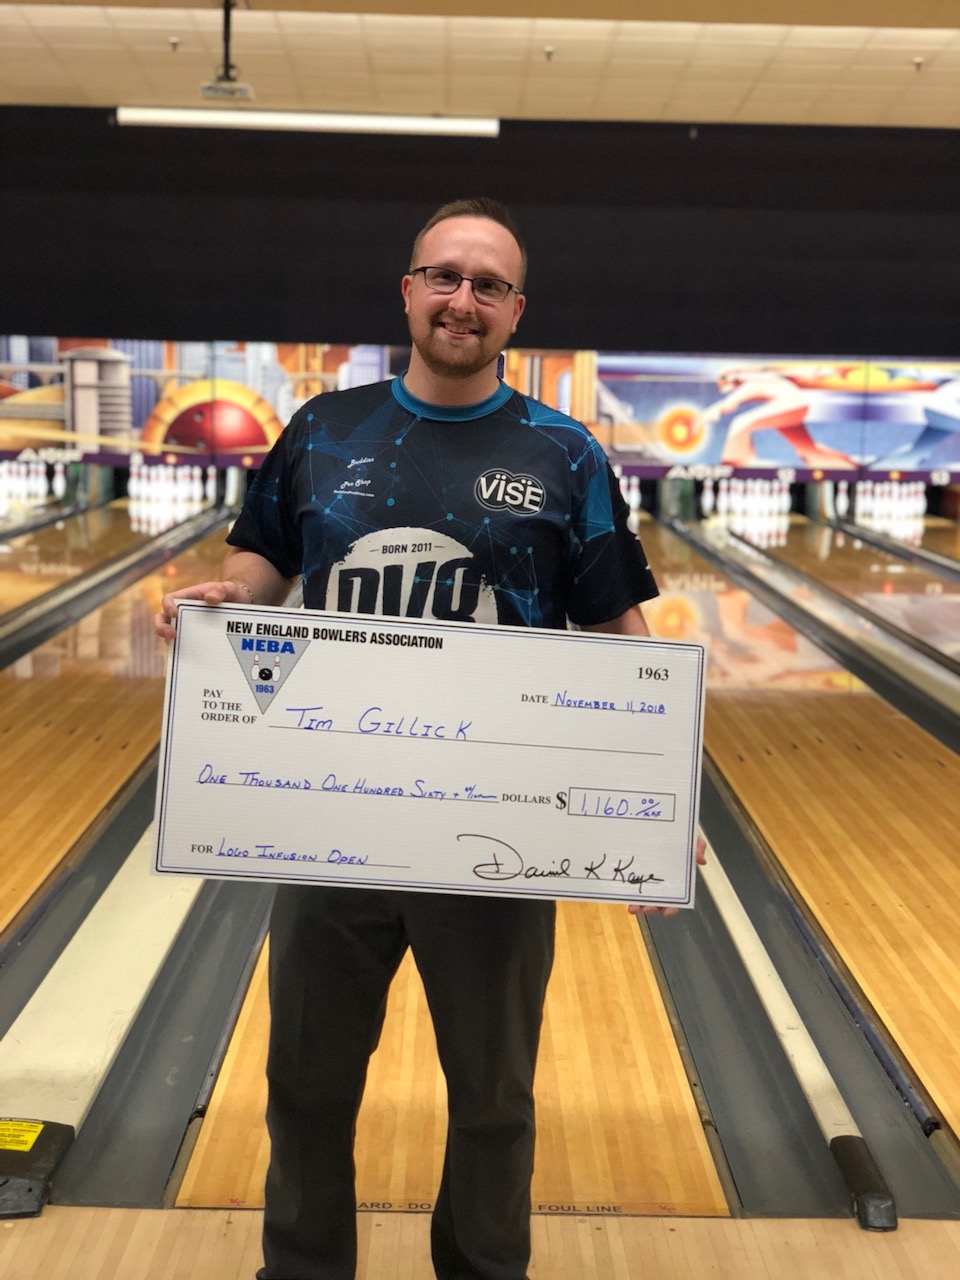 Tim Gillick Champ at Logo Infusion Open for 2nd Title